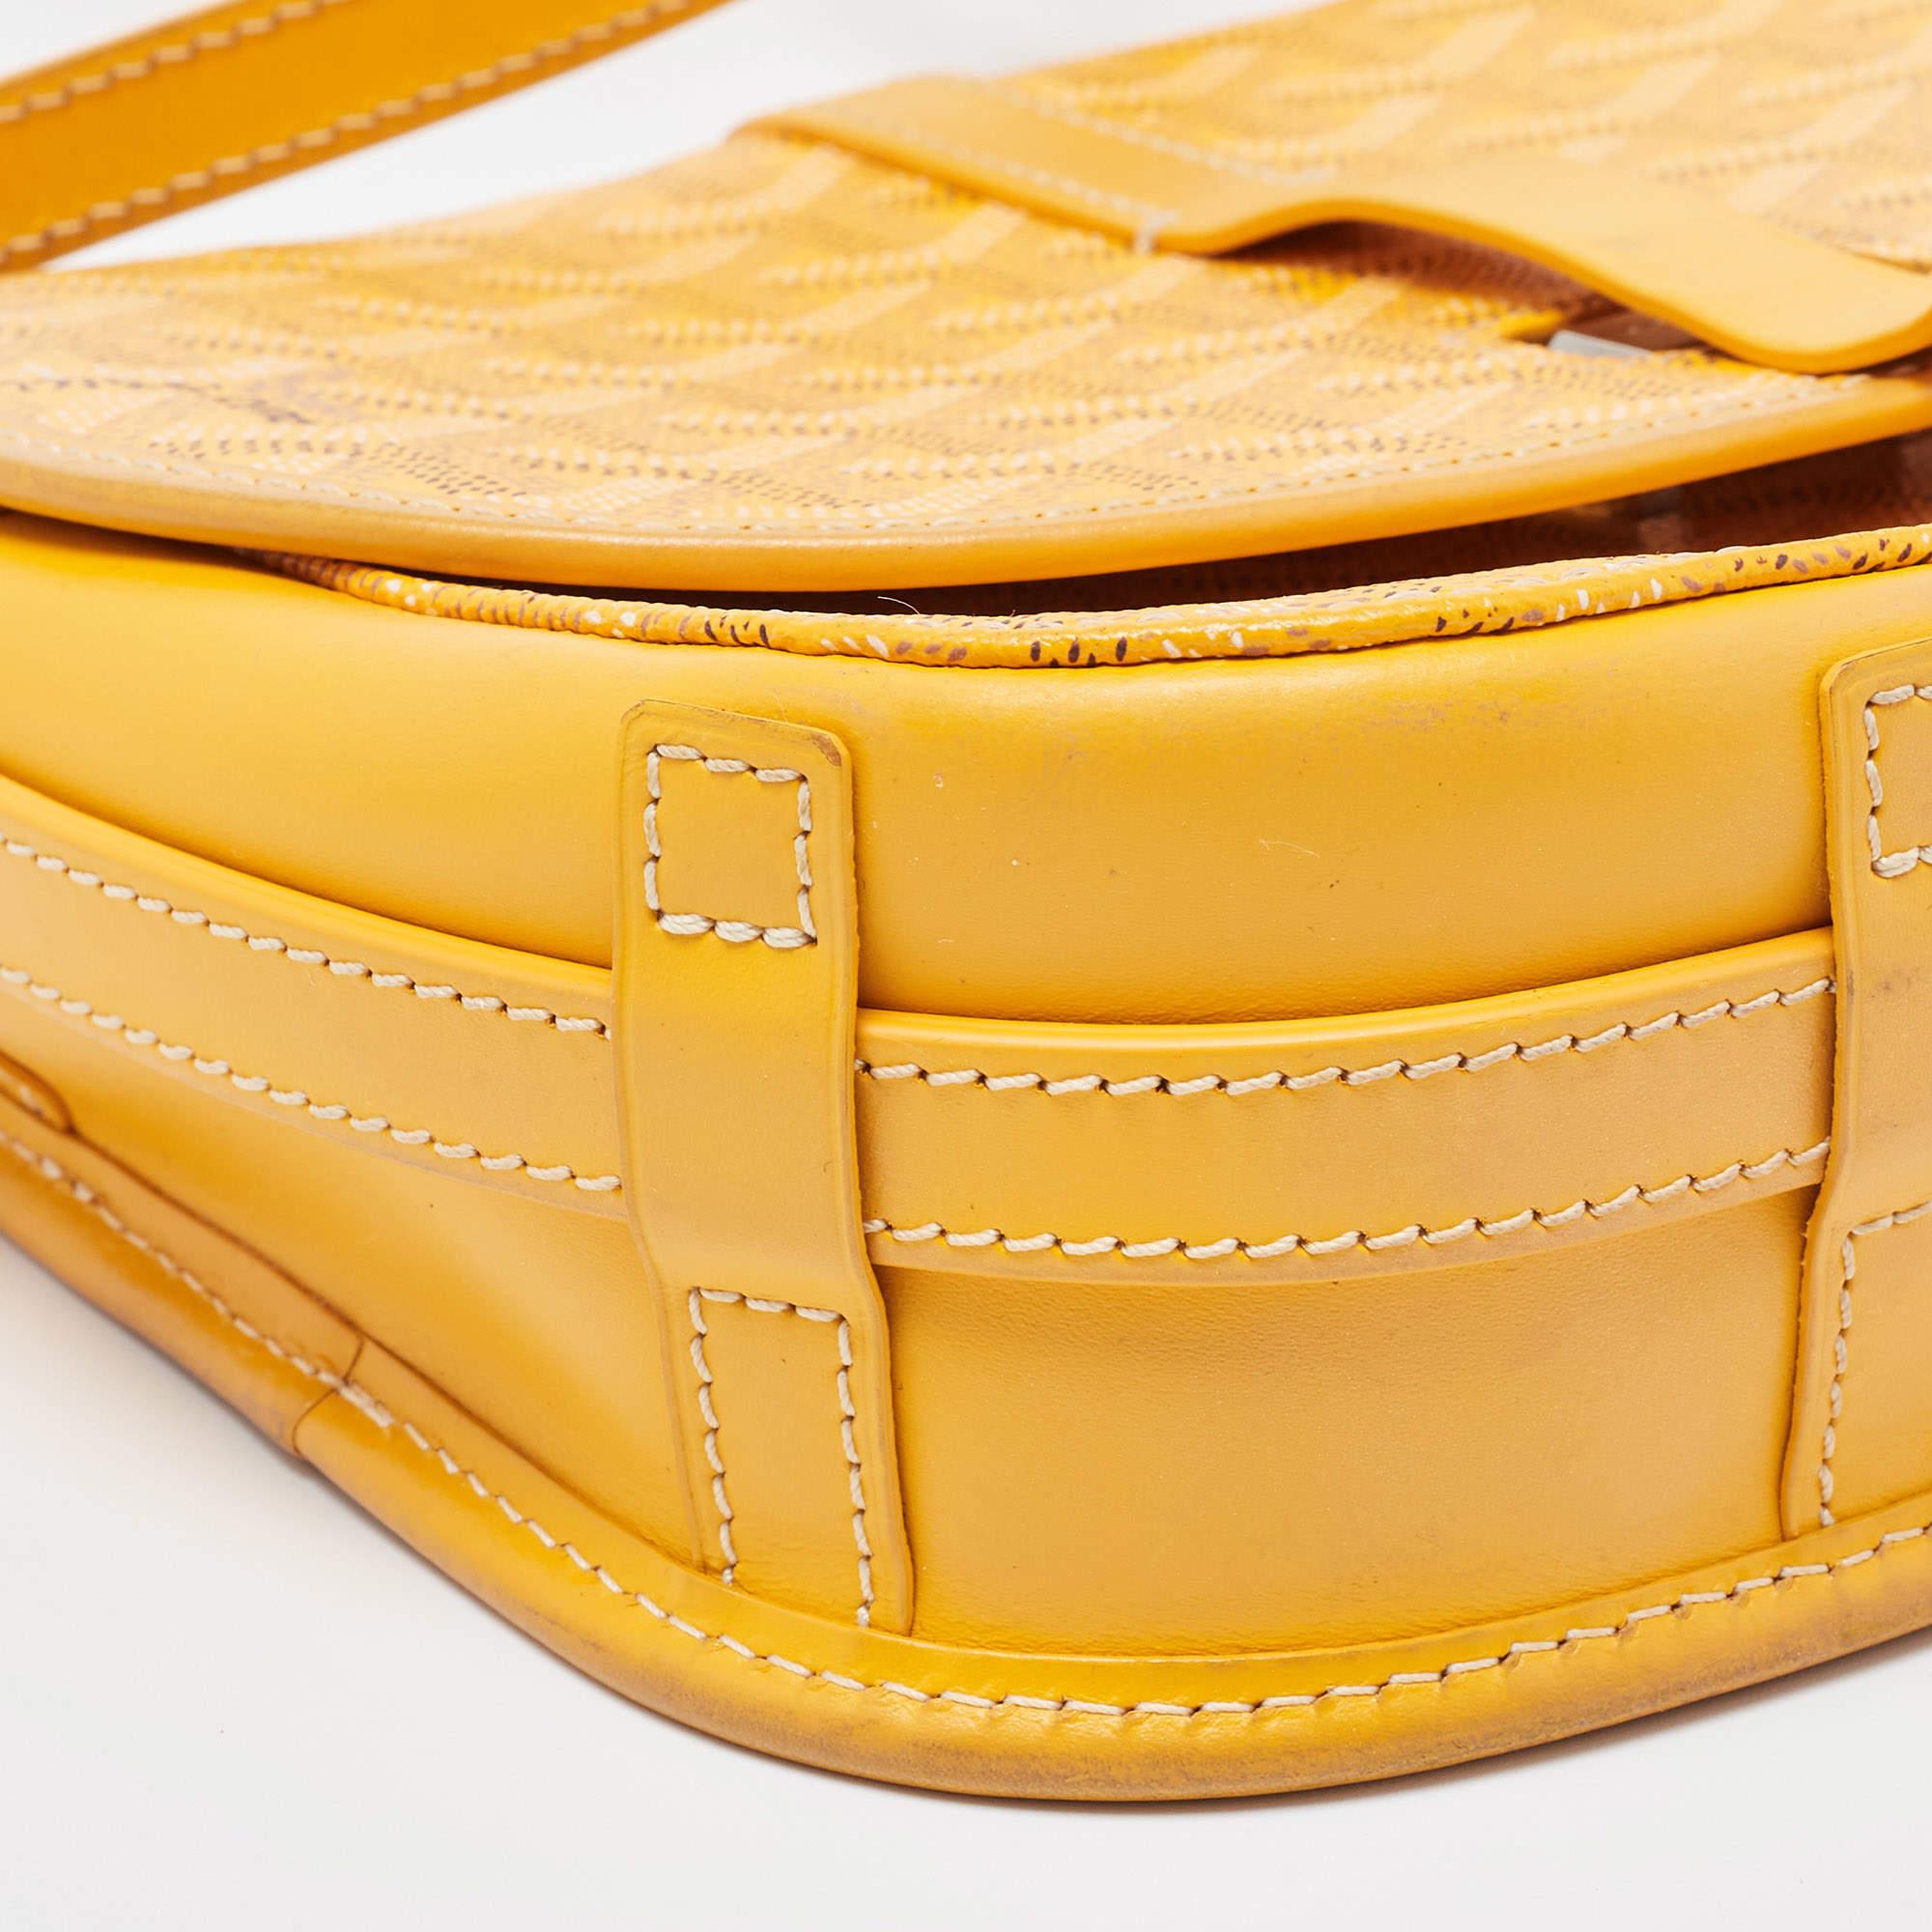 Goyard Yellow Goyardine Coated Canvas and Leather Belvedere PM Bag 2